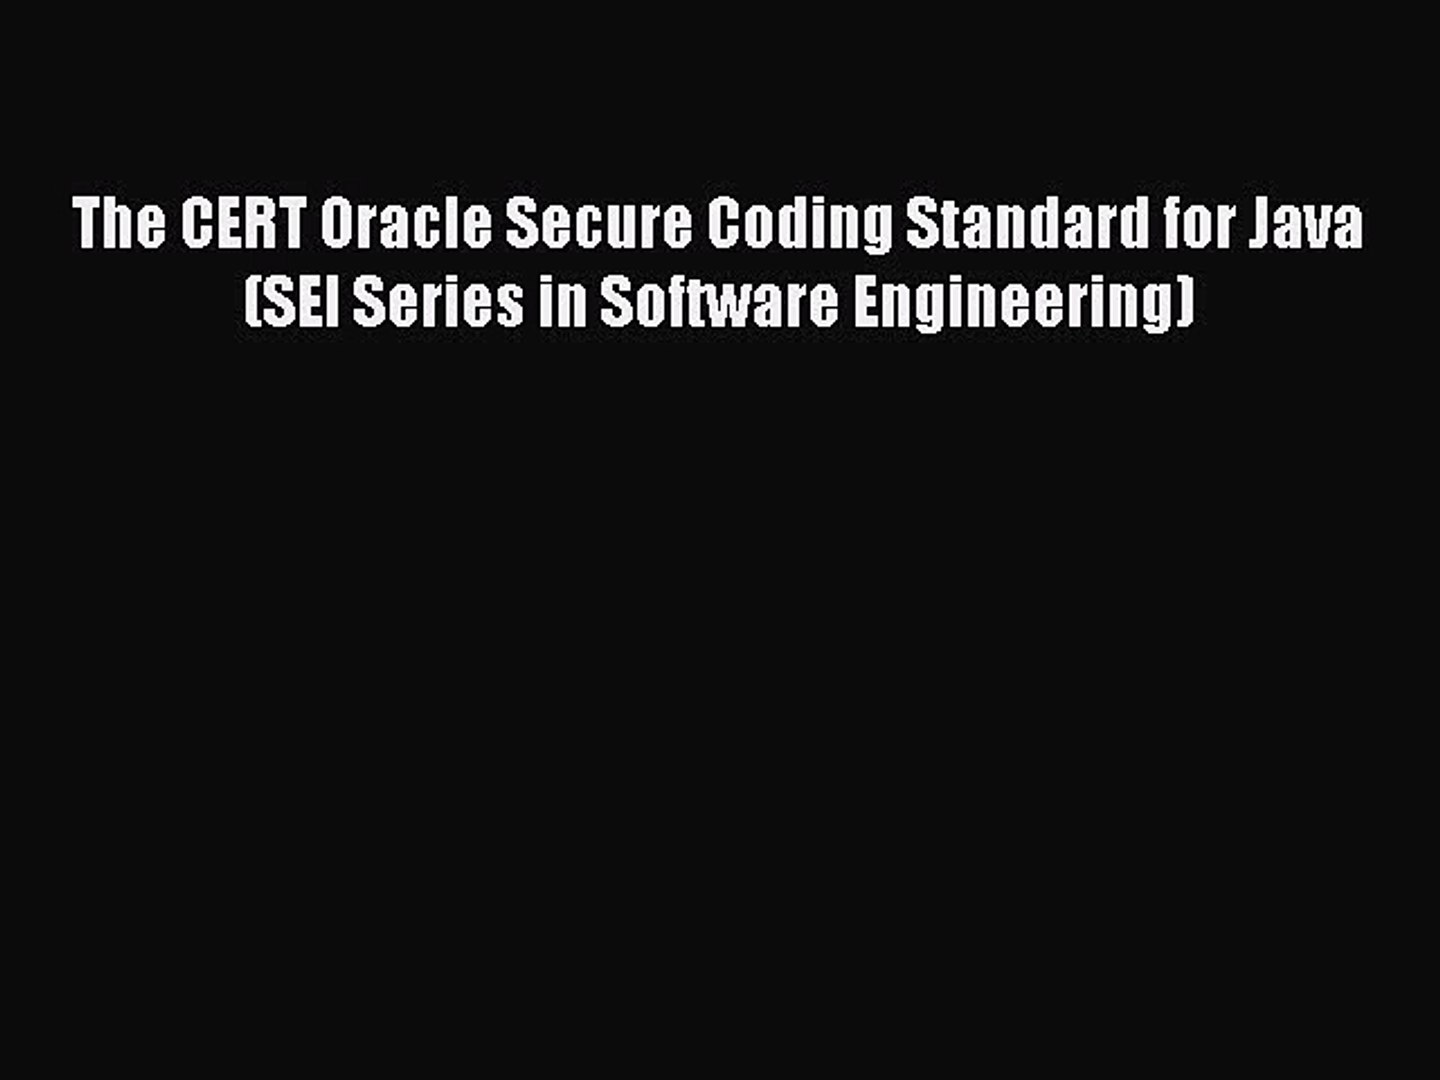 Download The CERT Oracle Secure Coding Standard for Java (SEI Series in Software Engineering)